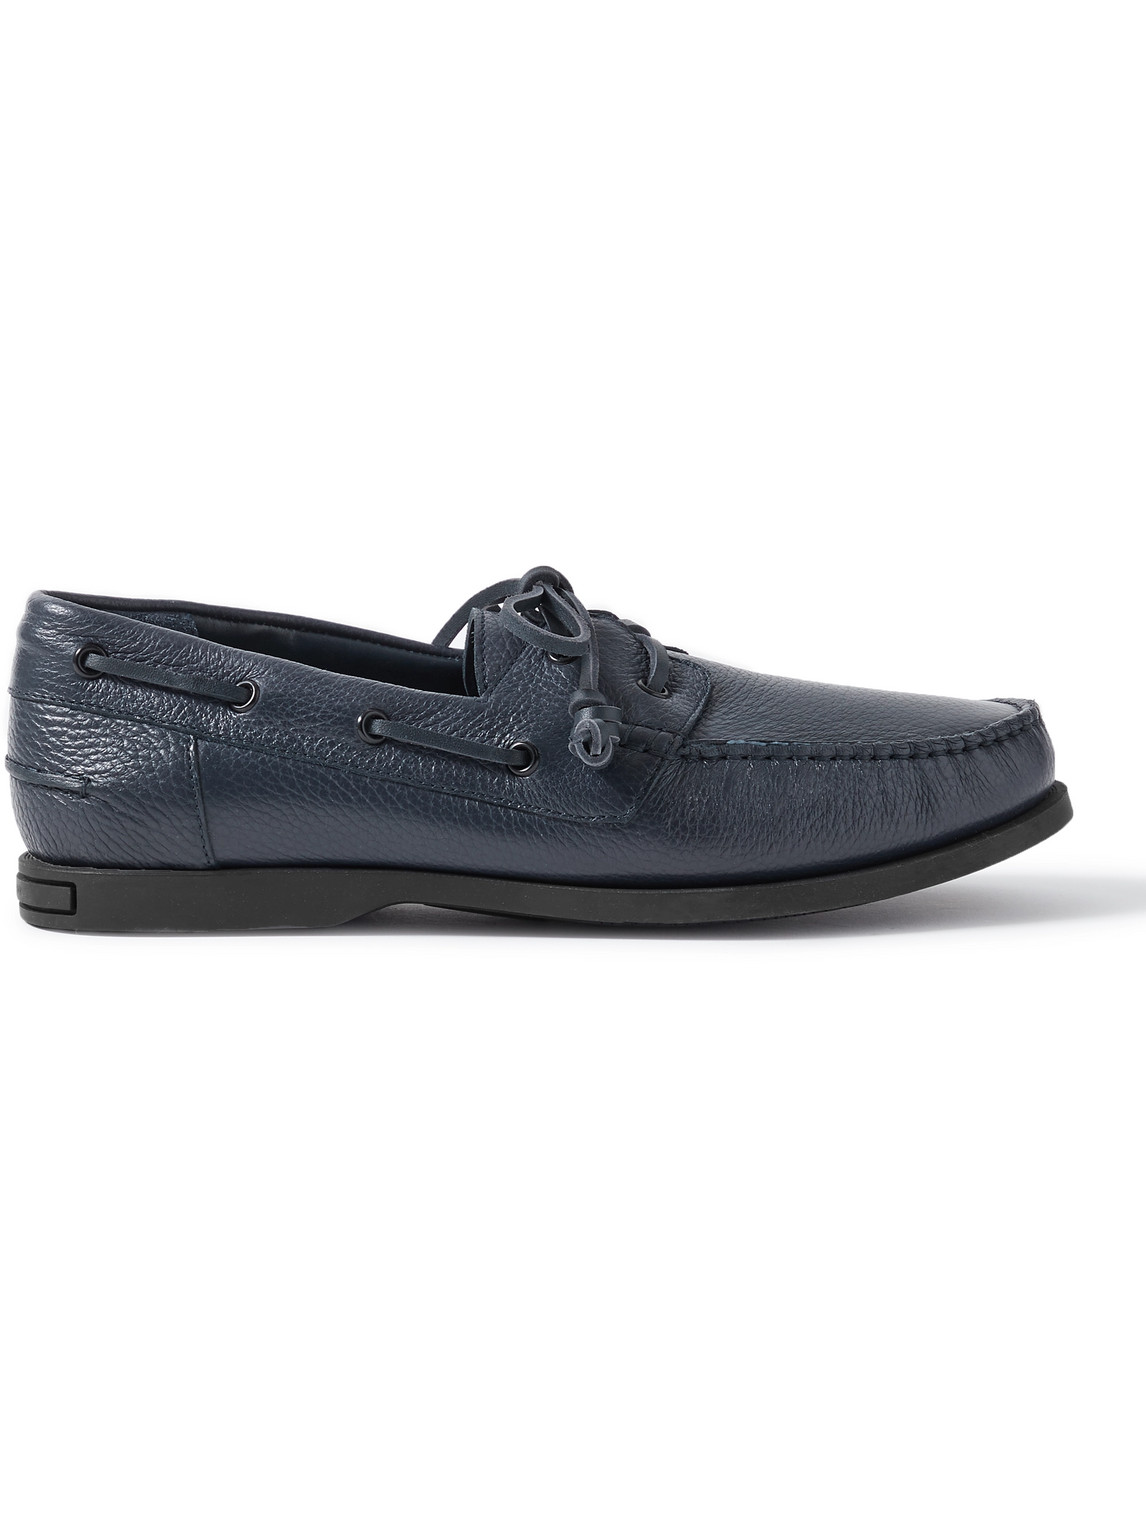 Sidmouth Full-Grain Leather Boat Shoes